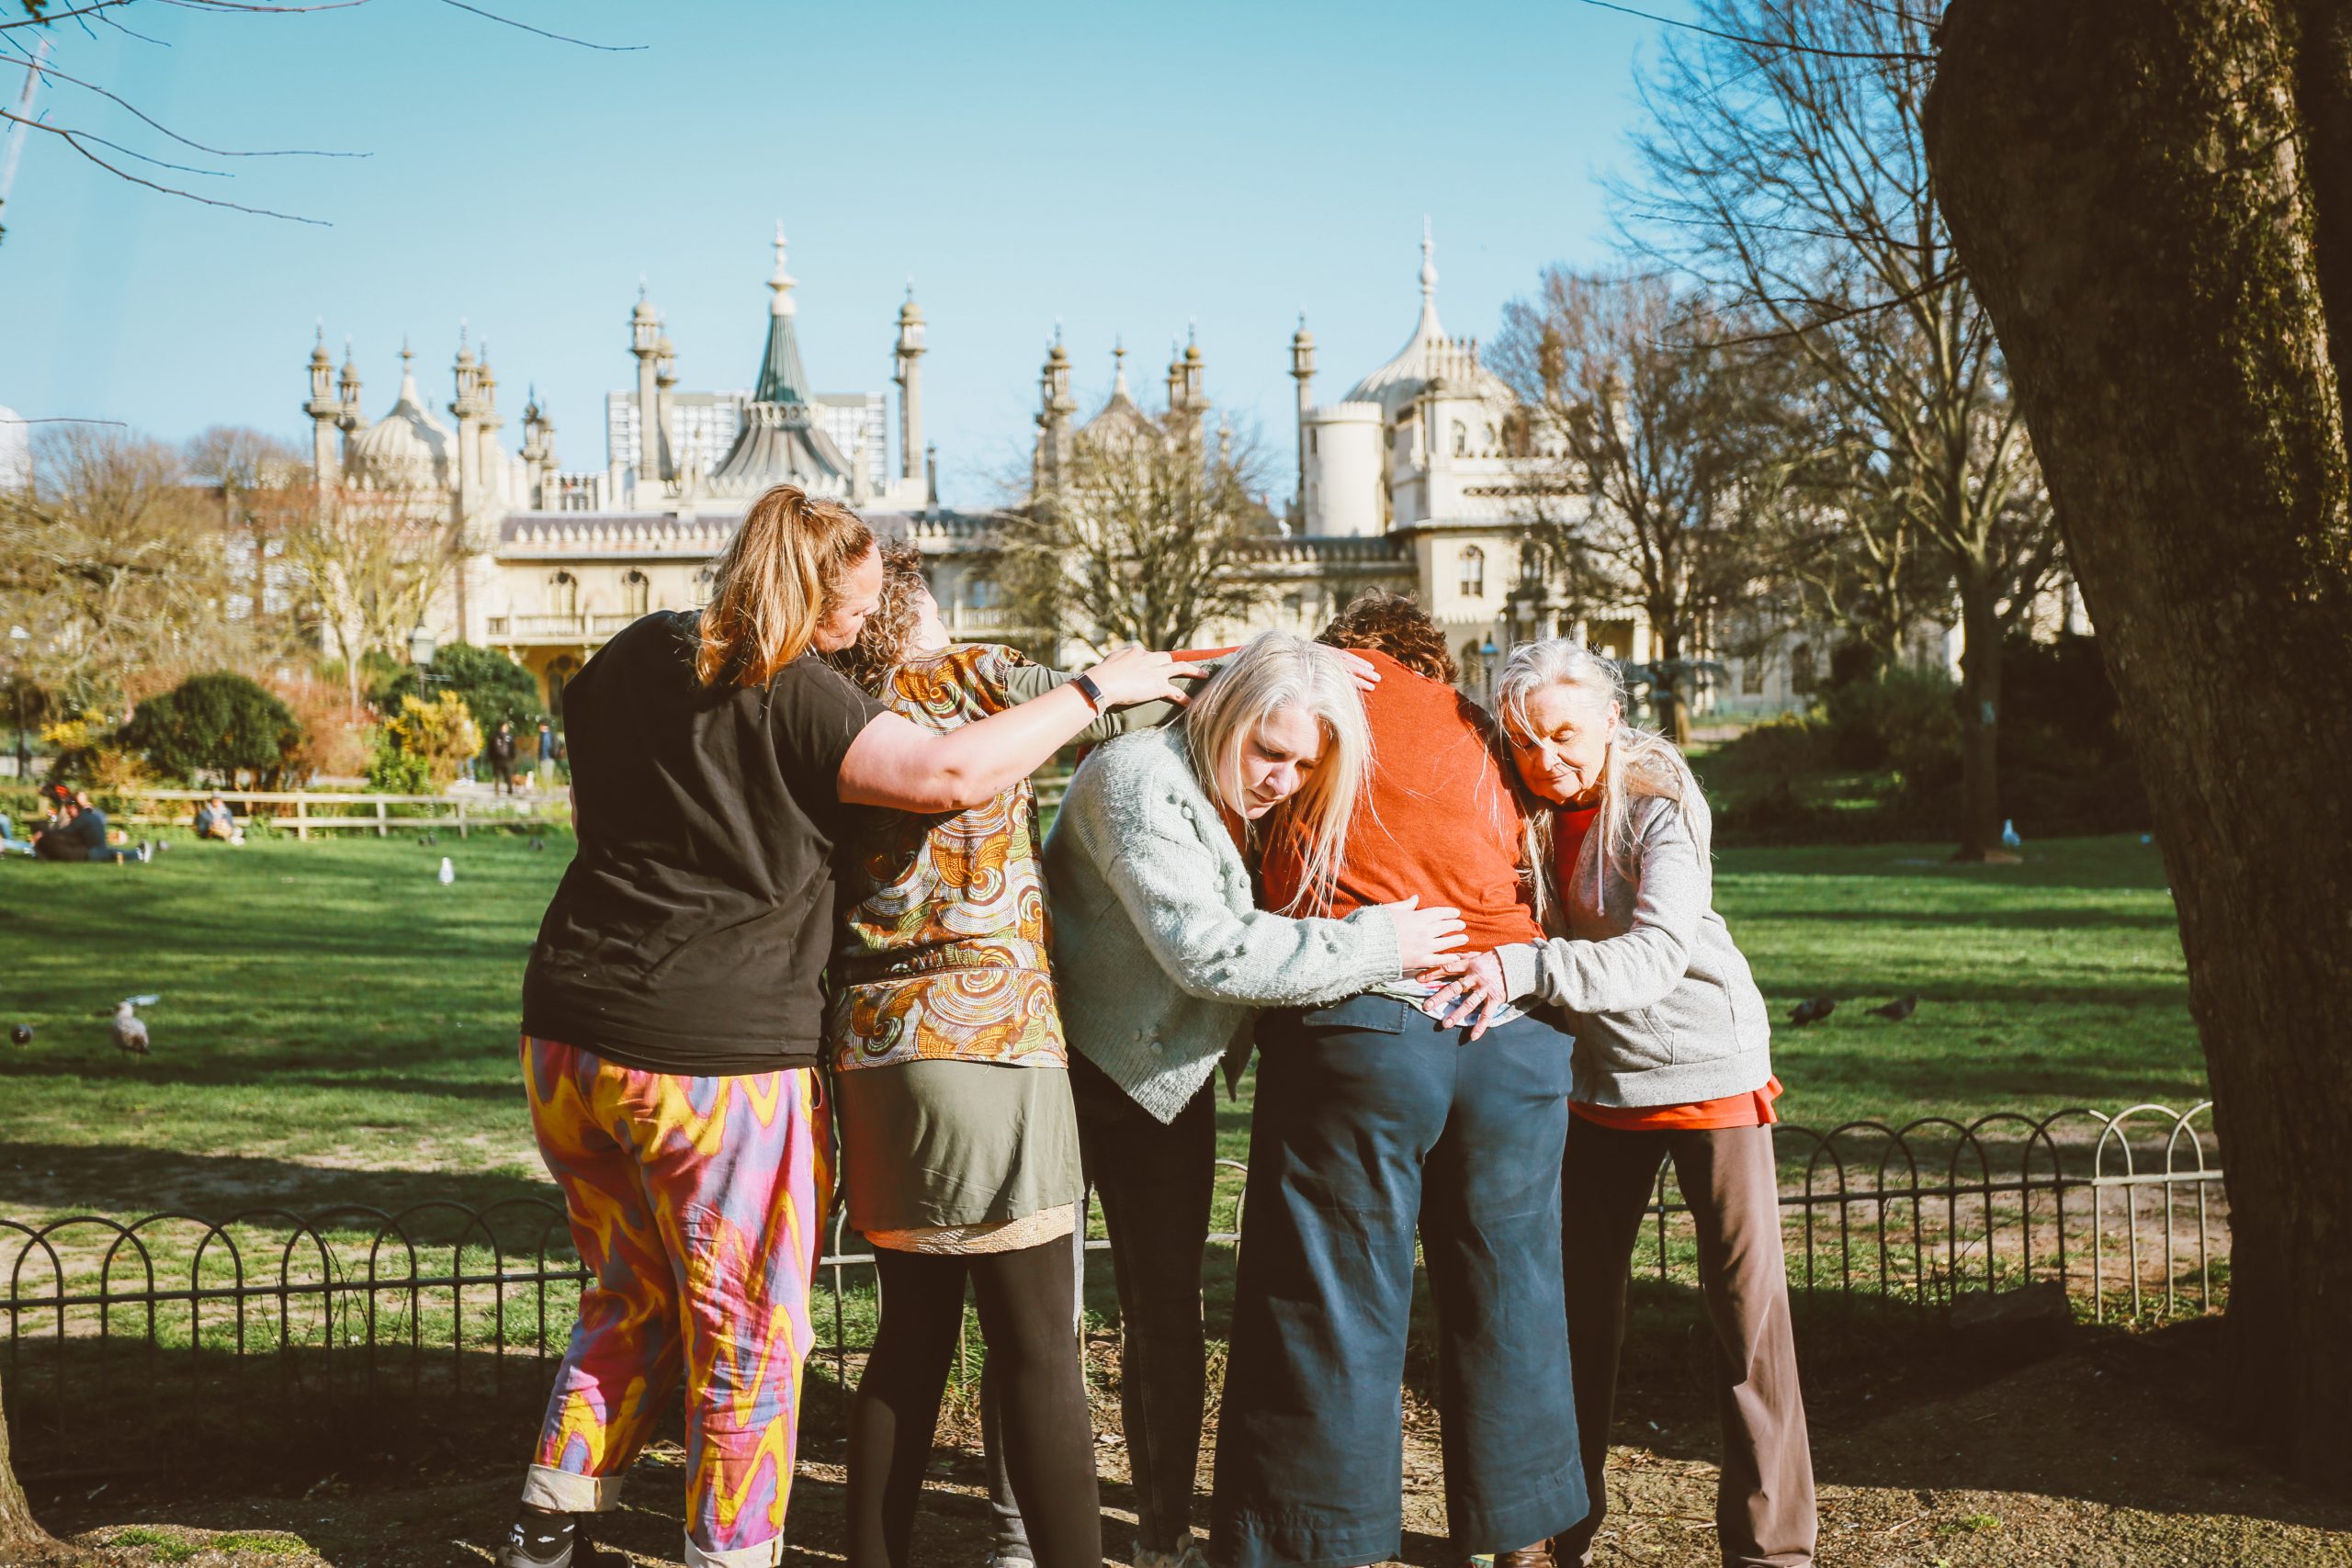 A group of women hug each other in a park.